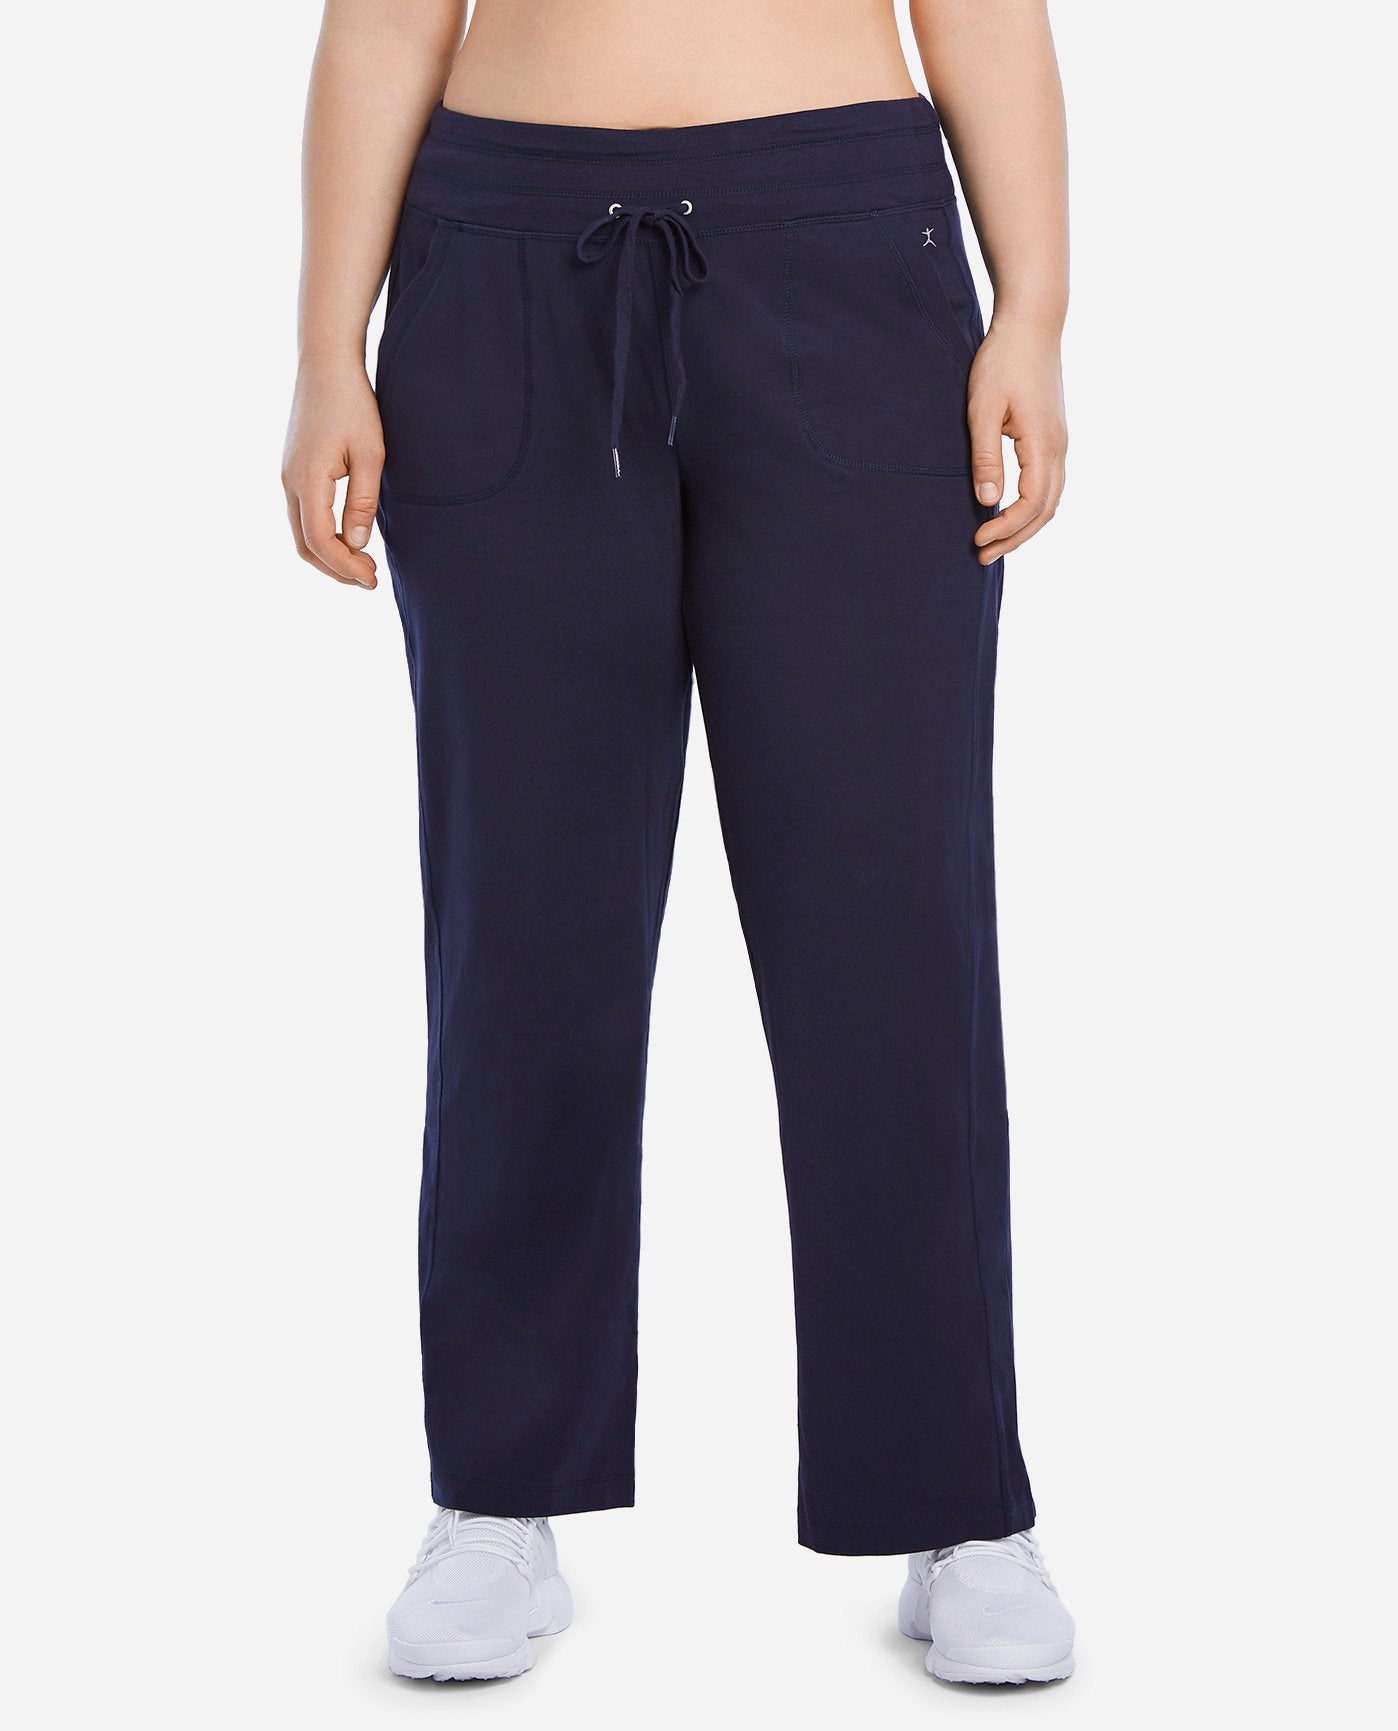 Danskin Now 100% Polyester Solid Blue Track Pants Size XL - 47% off